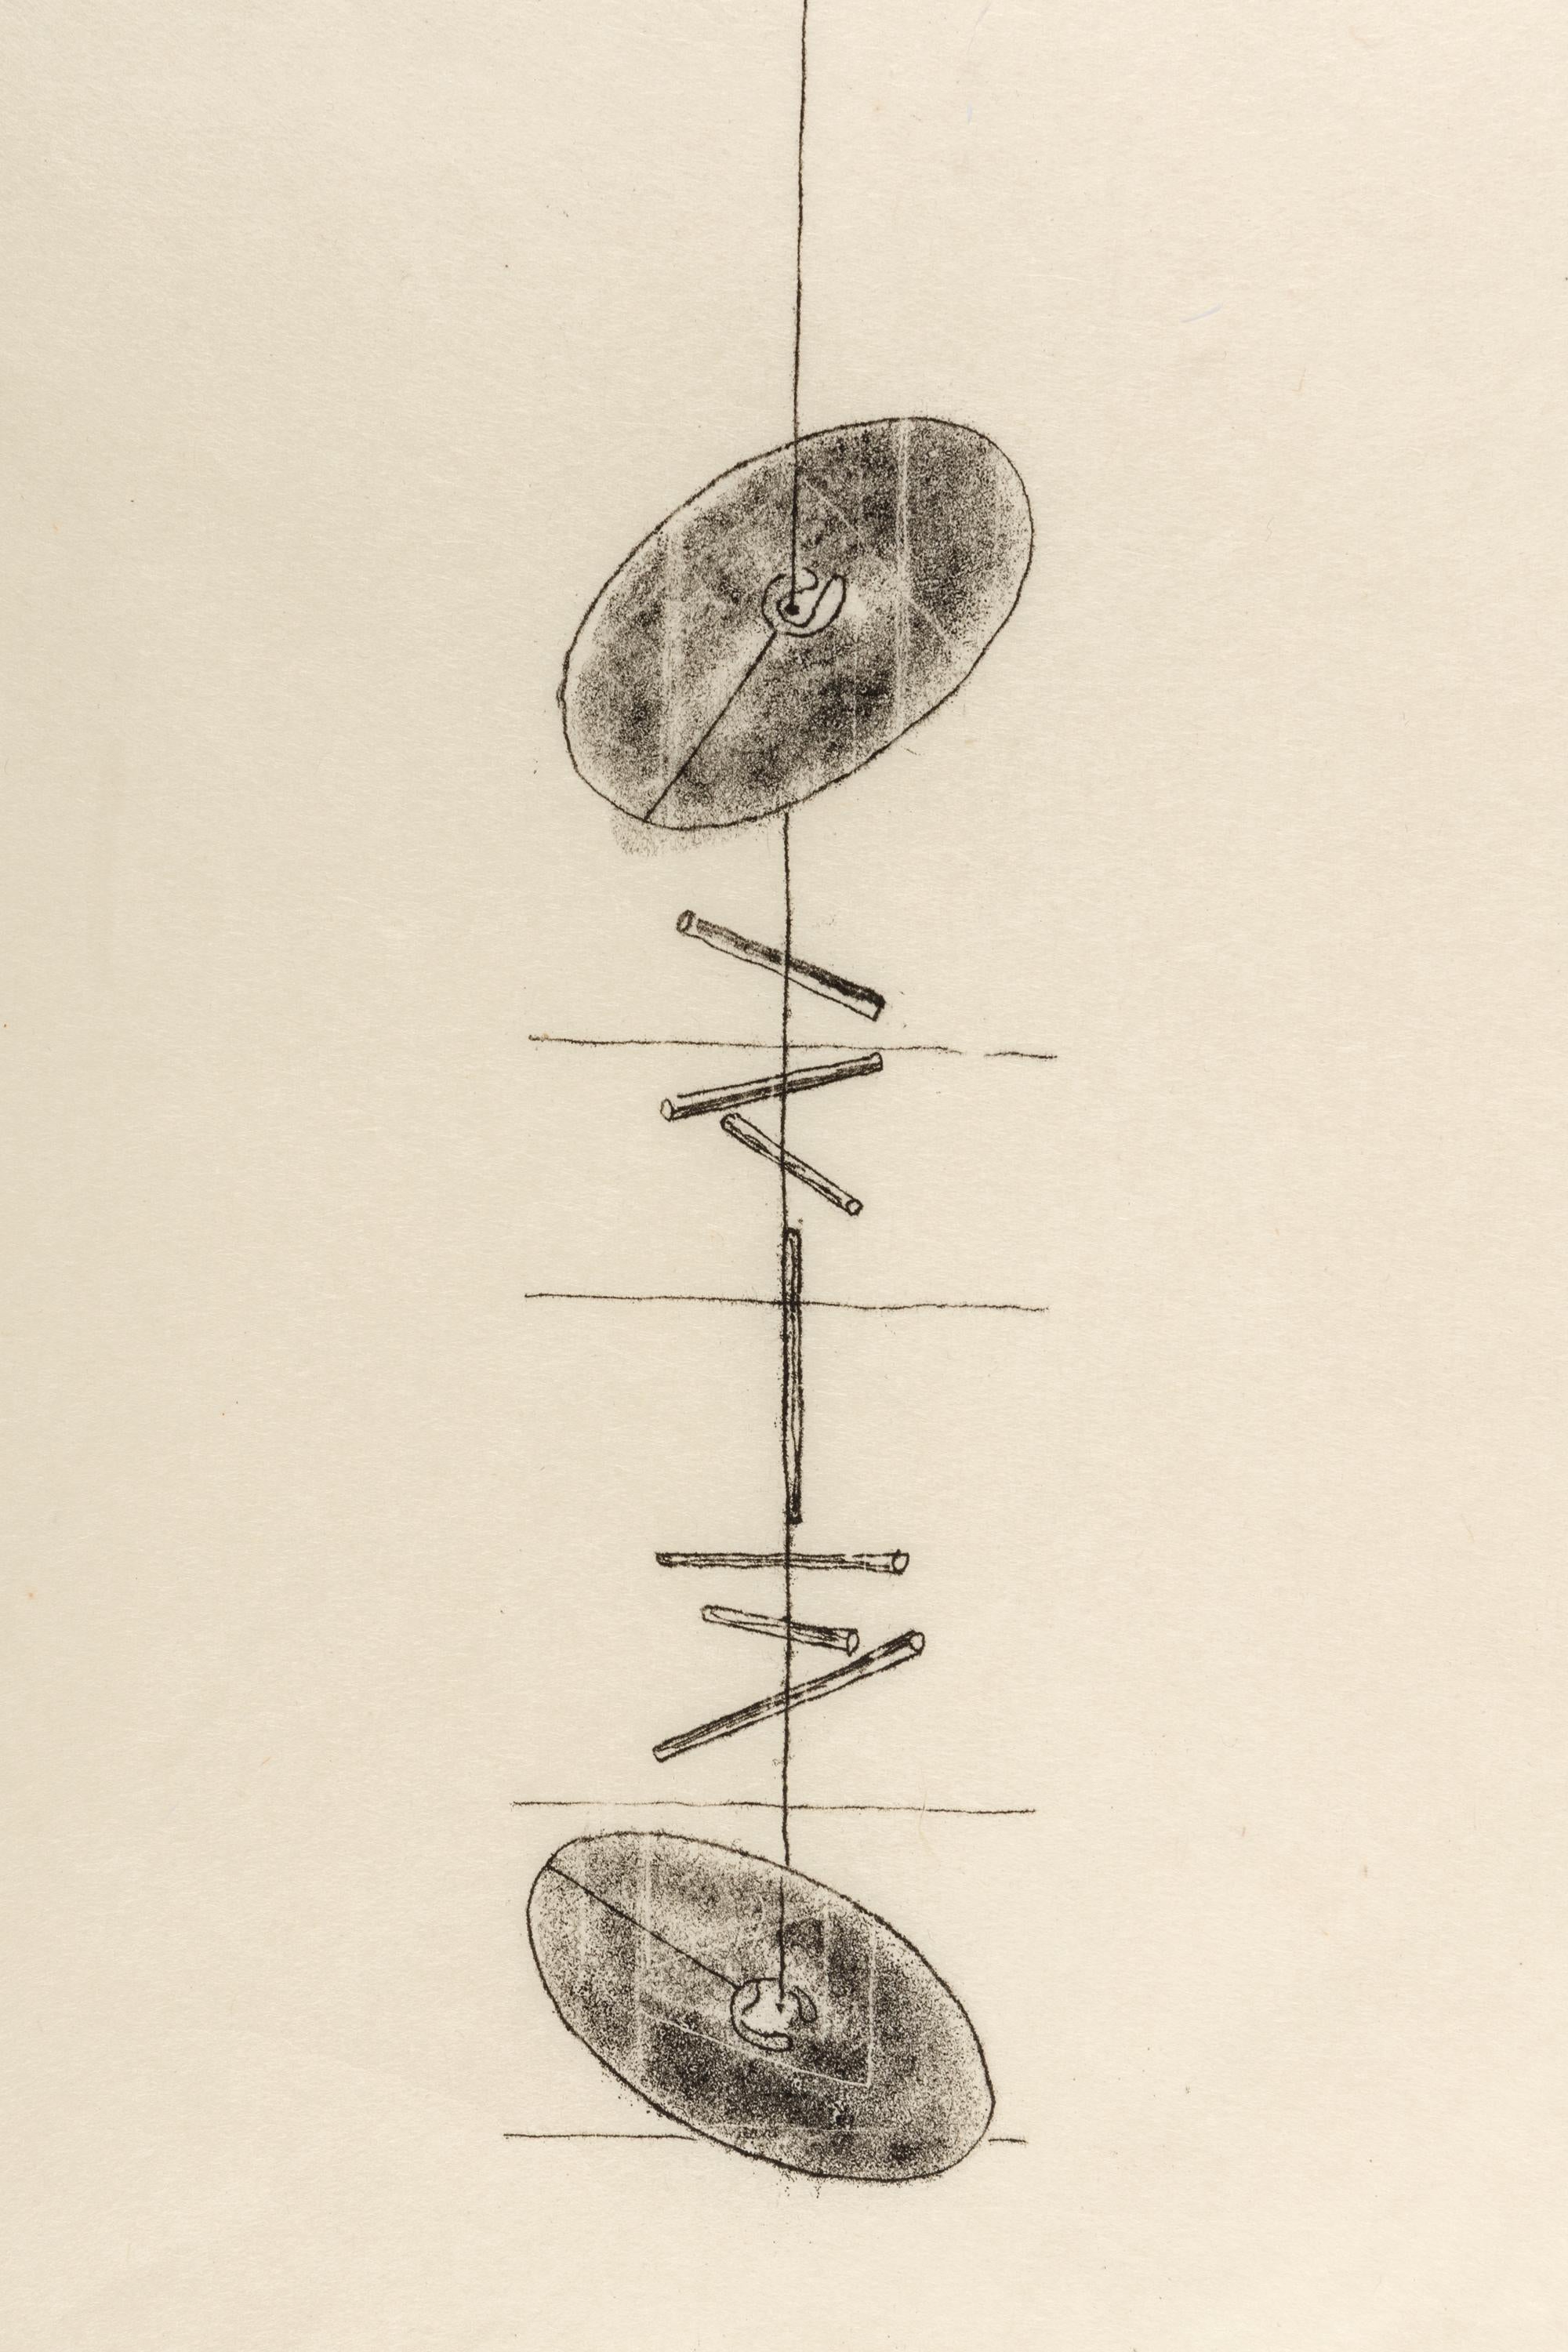 Bertoia created hundreds if not thousands of one of a kind monotypes in his career, often as working drawings for his sculpture works. He employed a variety of techniques to arrive at his unique ends, most often scribing the reverse of a paper on an